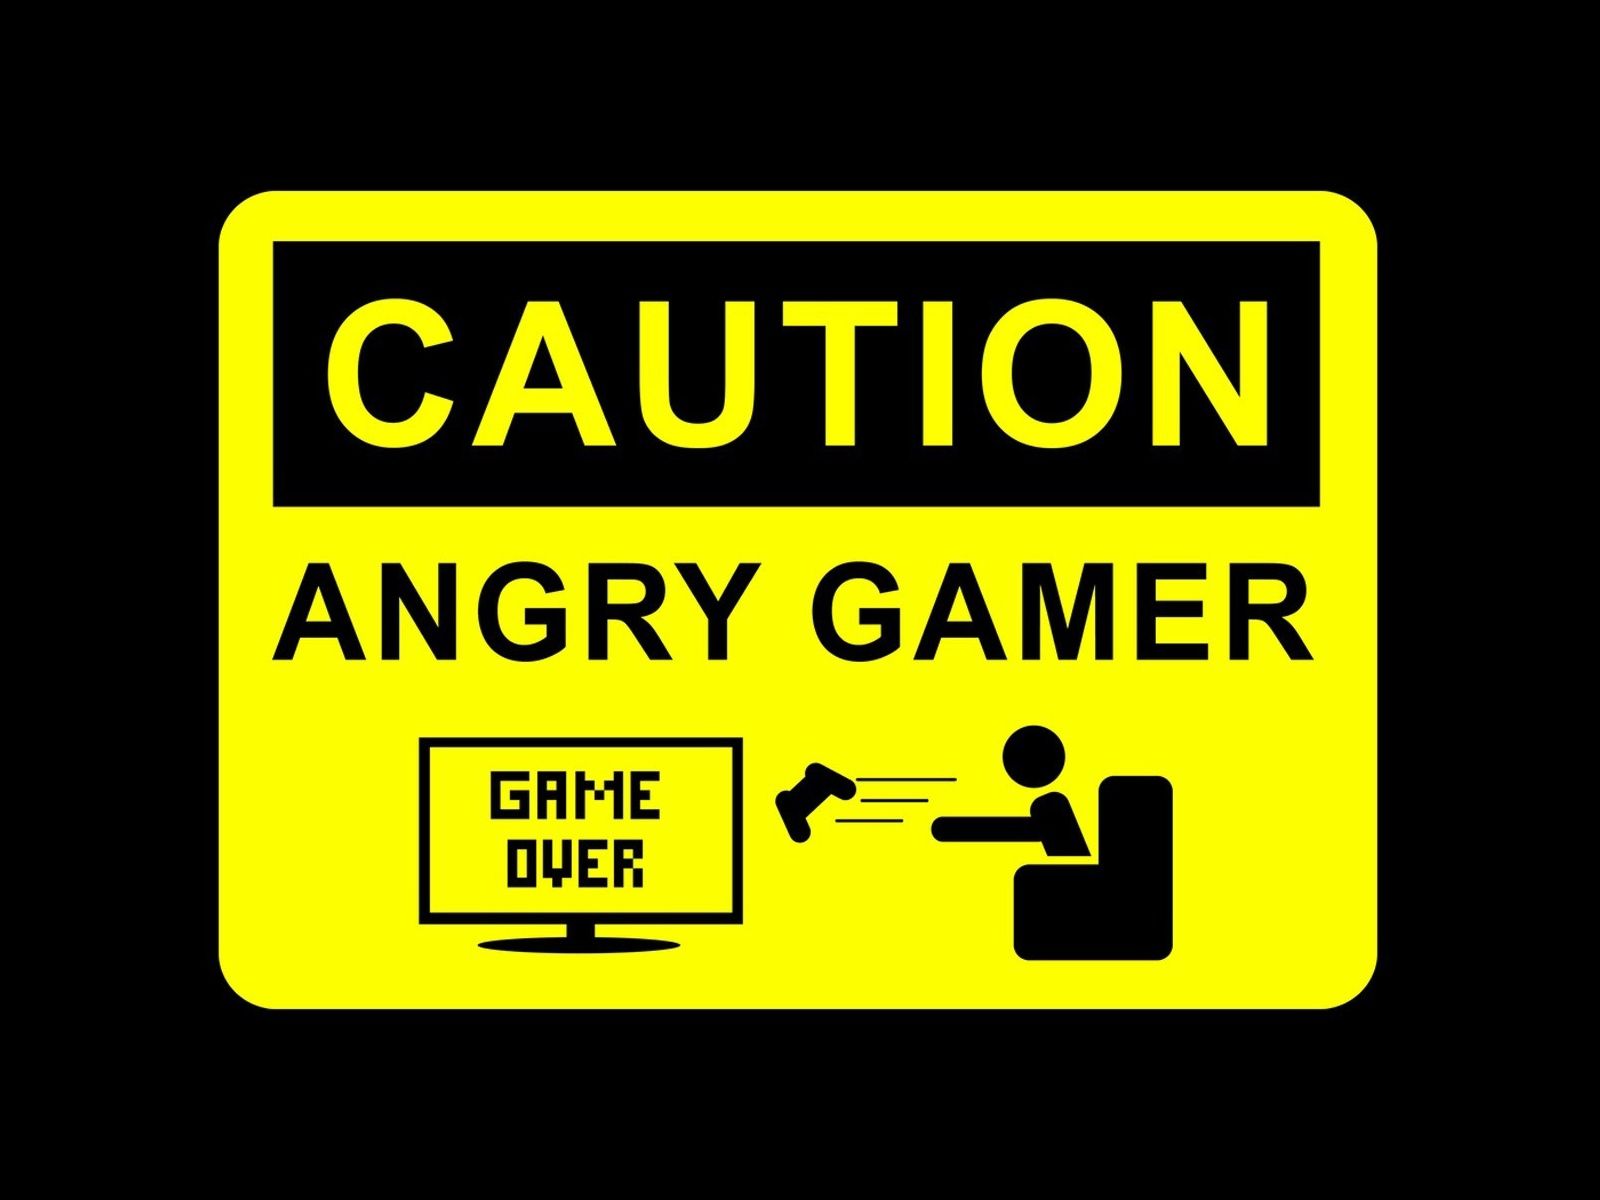 1600x1200 Caution angry gamer Wallpaper